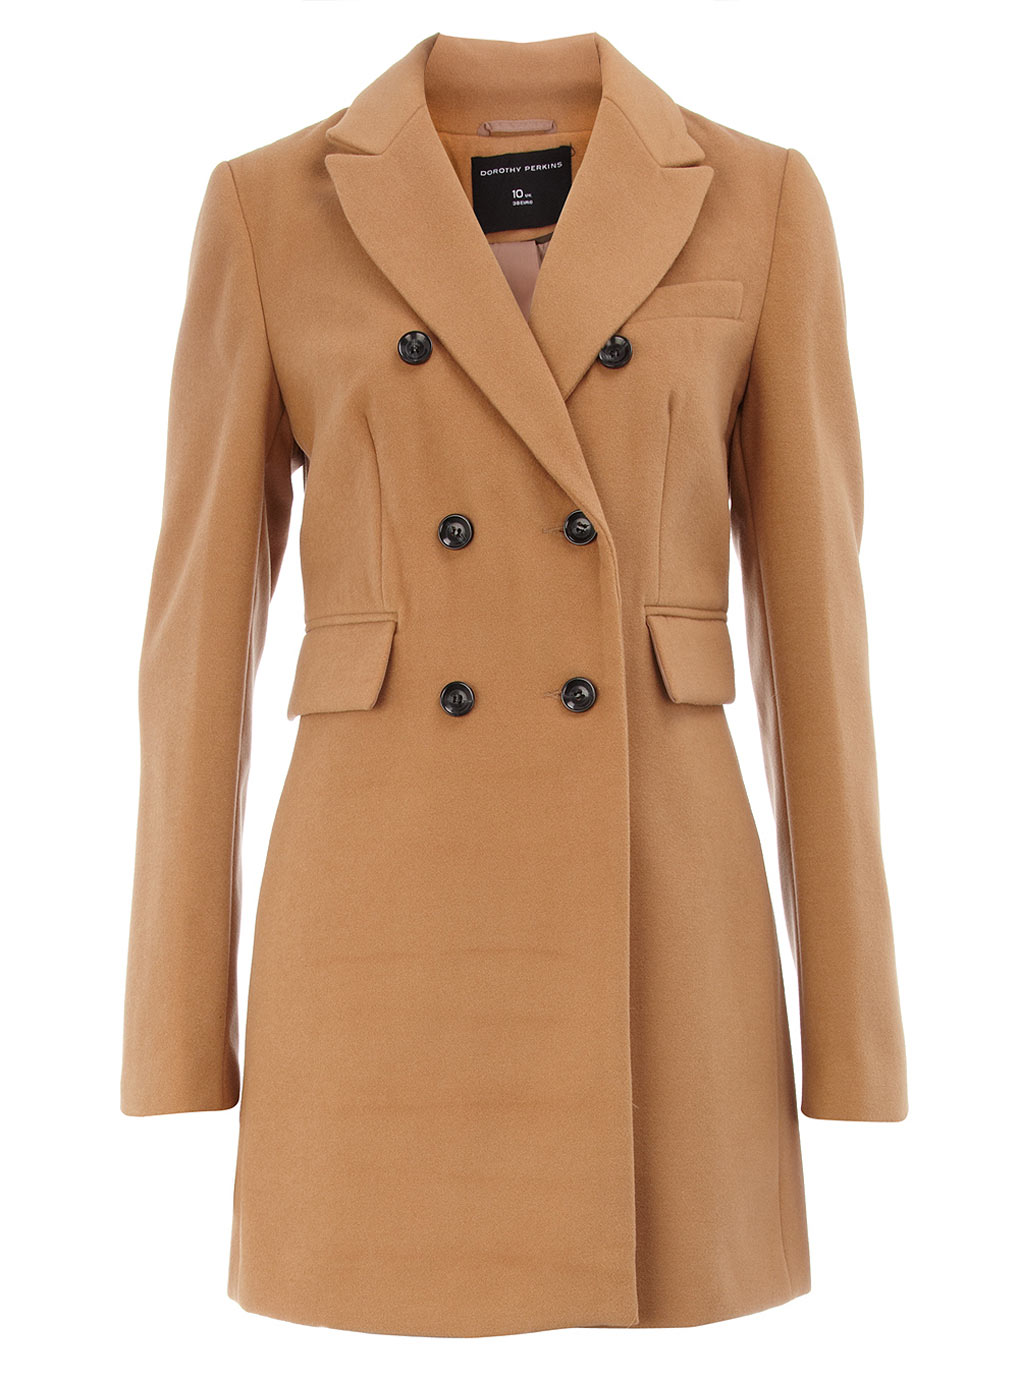 Caggie Dunlop’s camel coats on Made in Chelsea | Fashion Detective